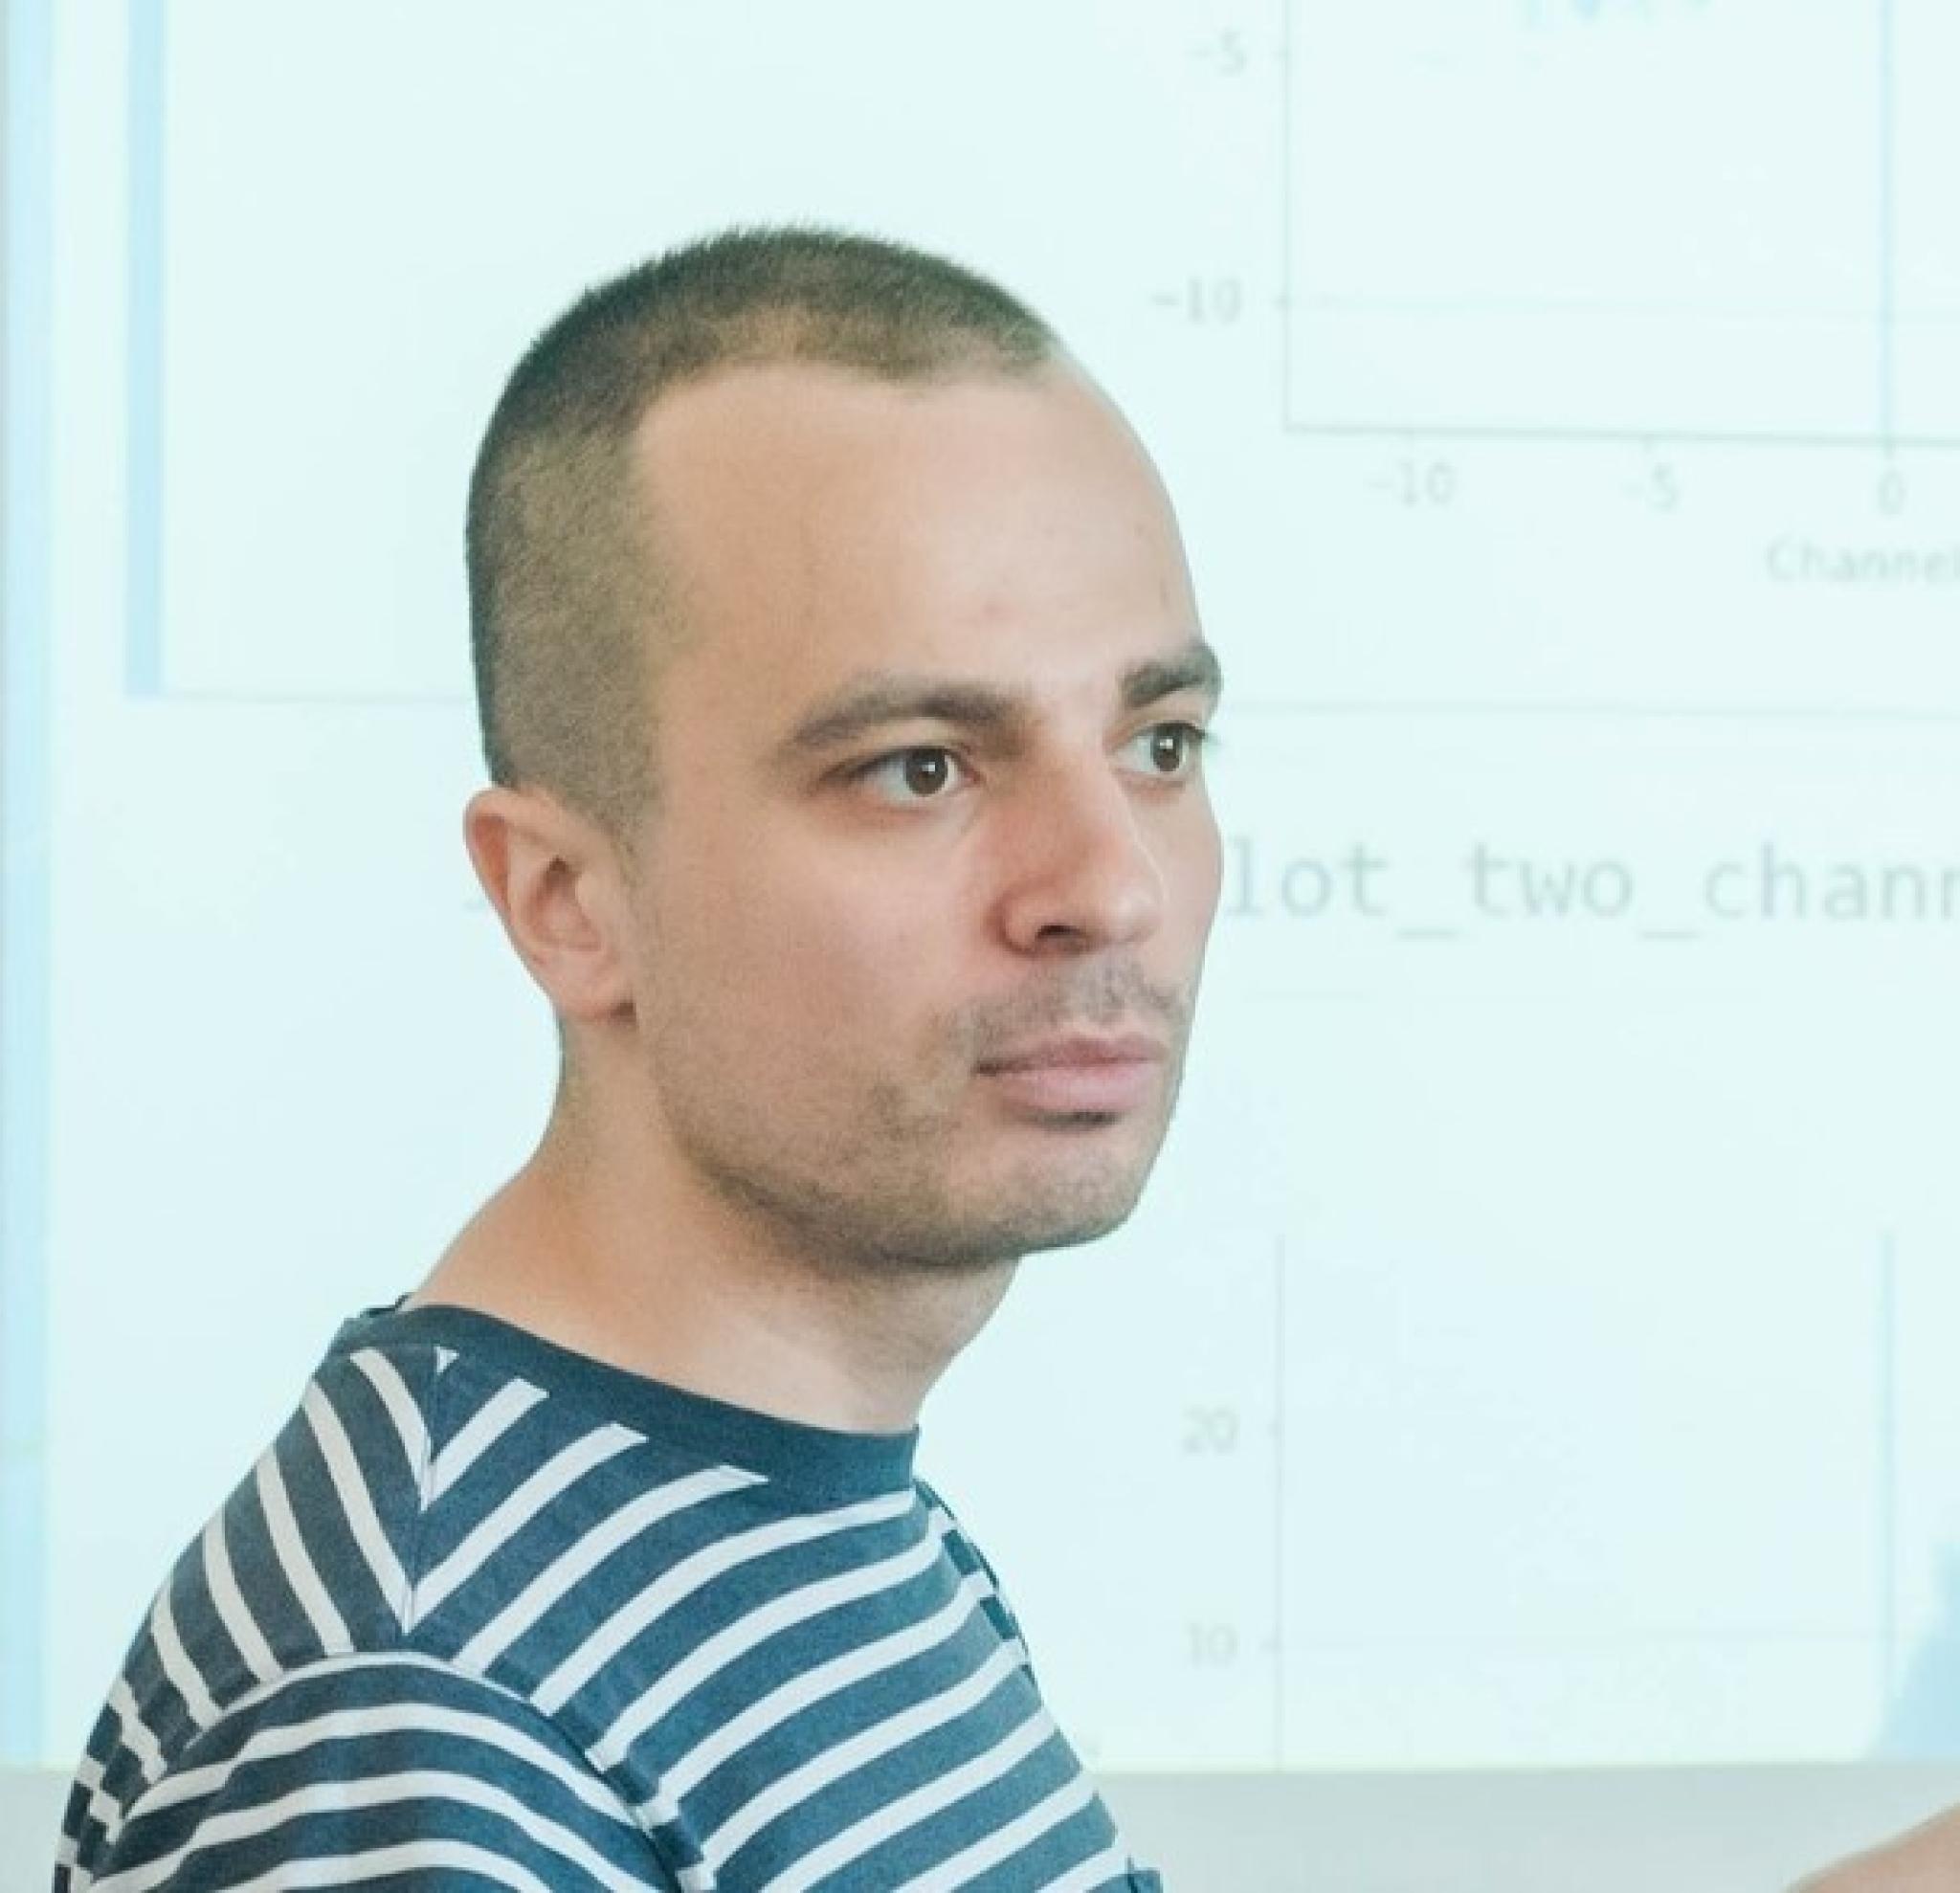 Zhenya looks to the side while standing in front of a whiteboard and wearing a blue and white striped shirt